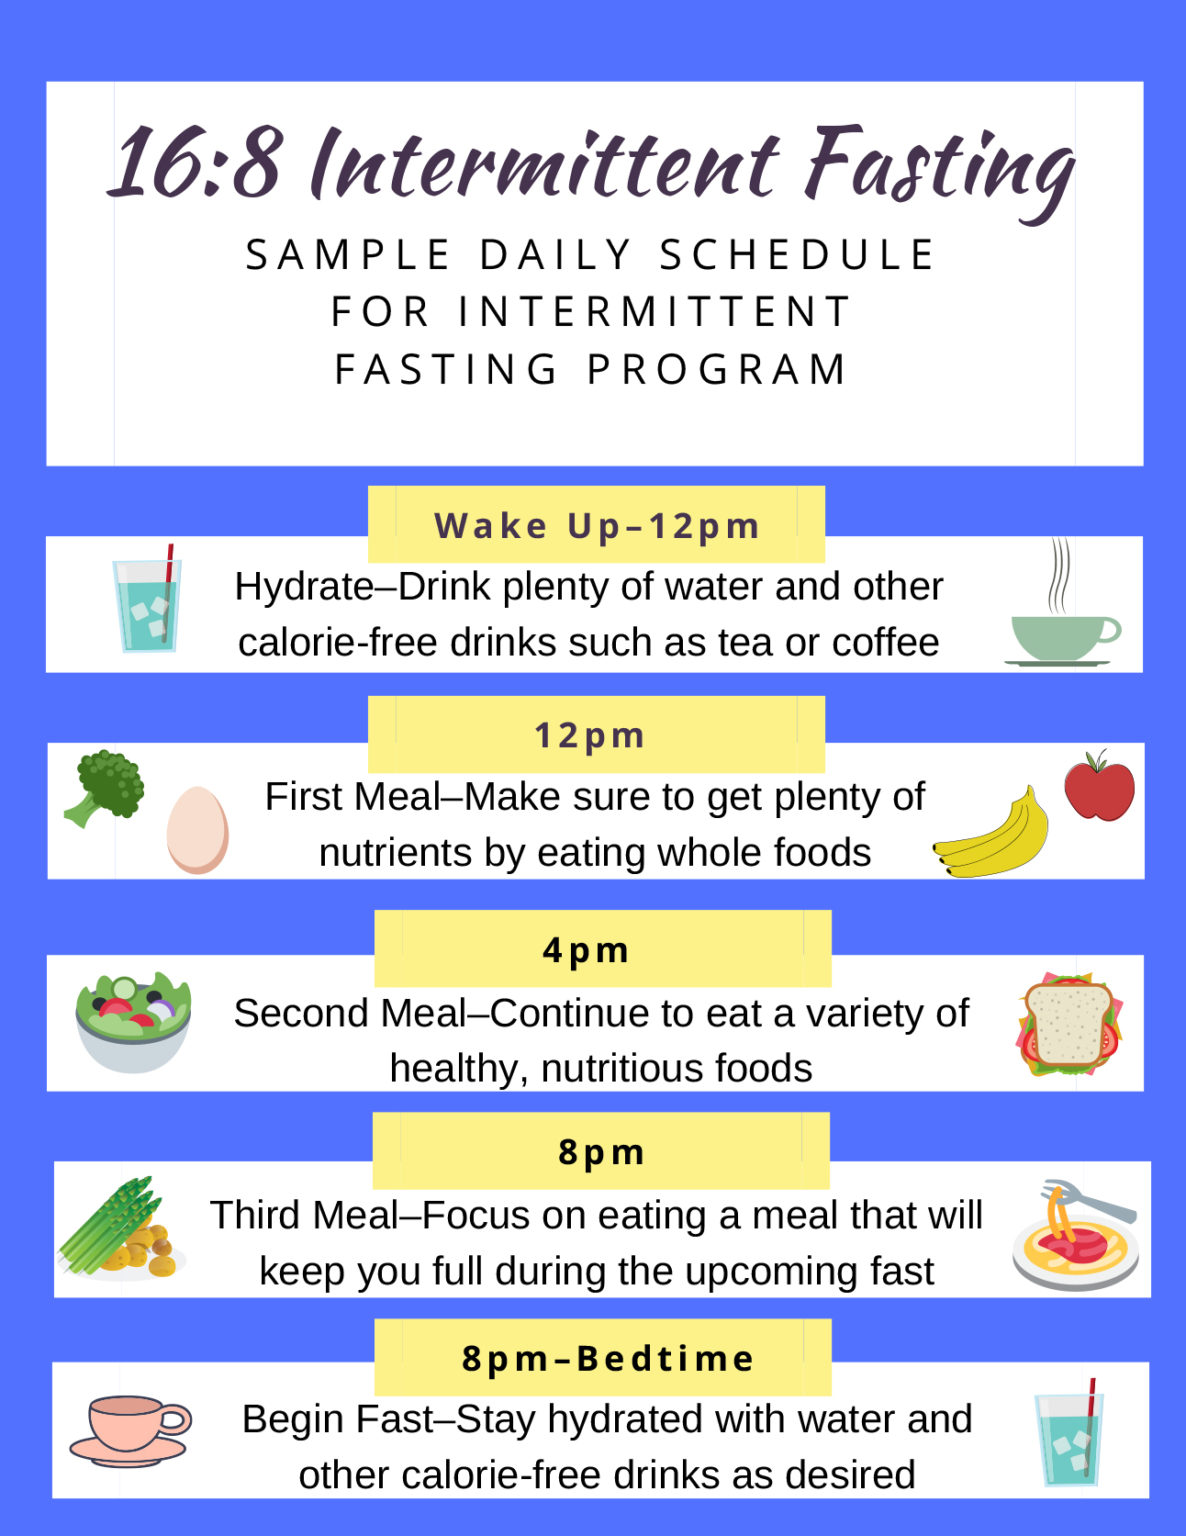 Is There A Free Intermittent Fasting Plan